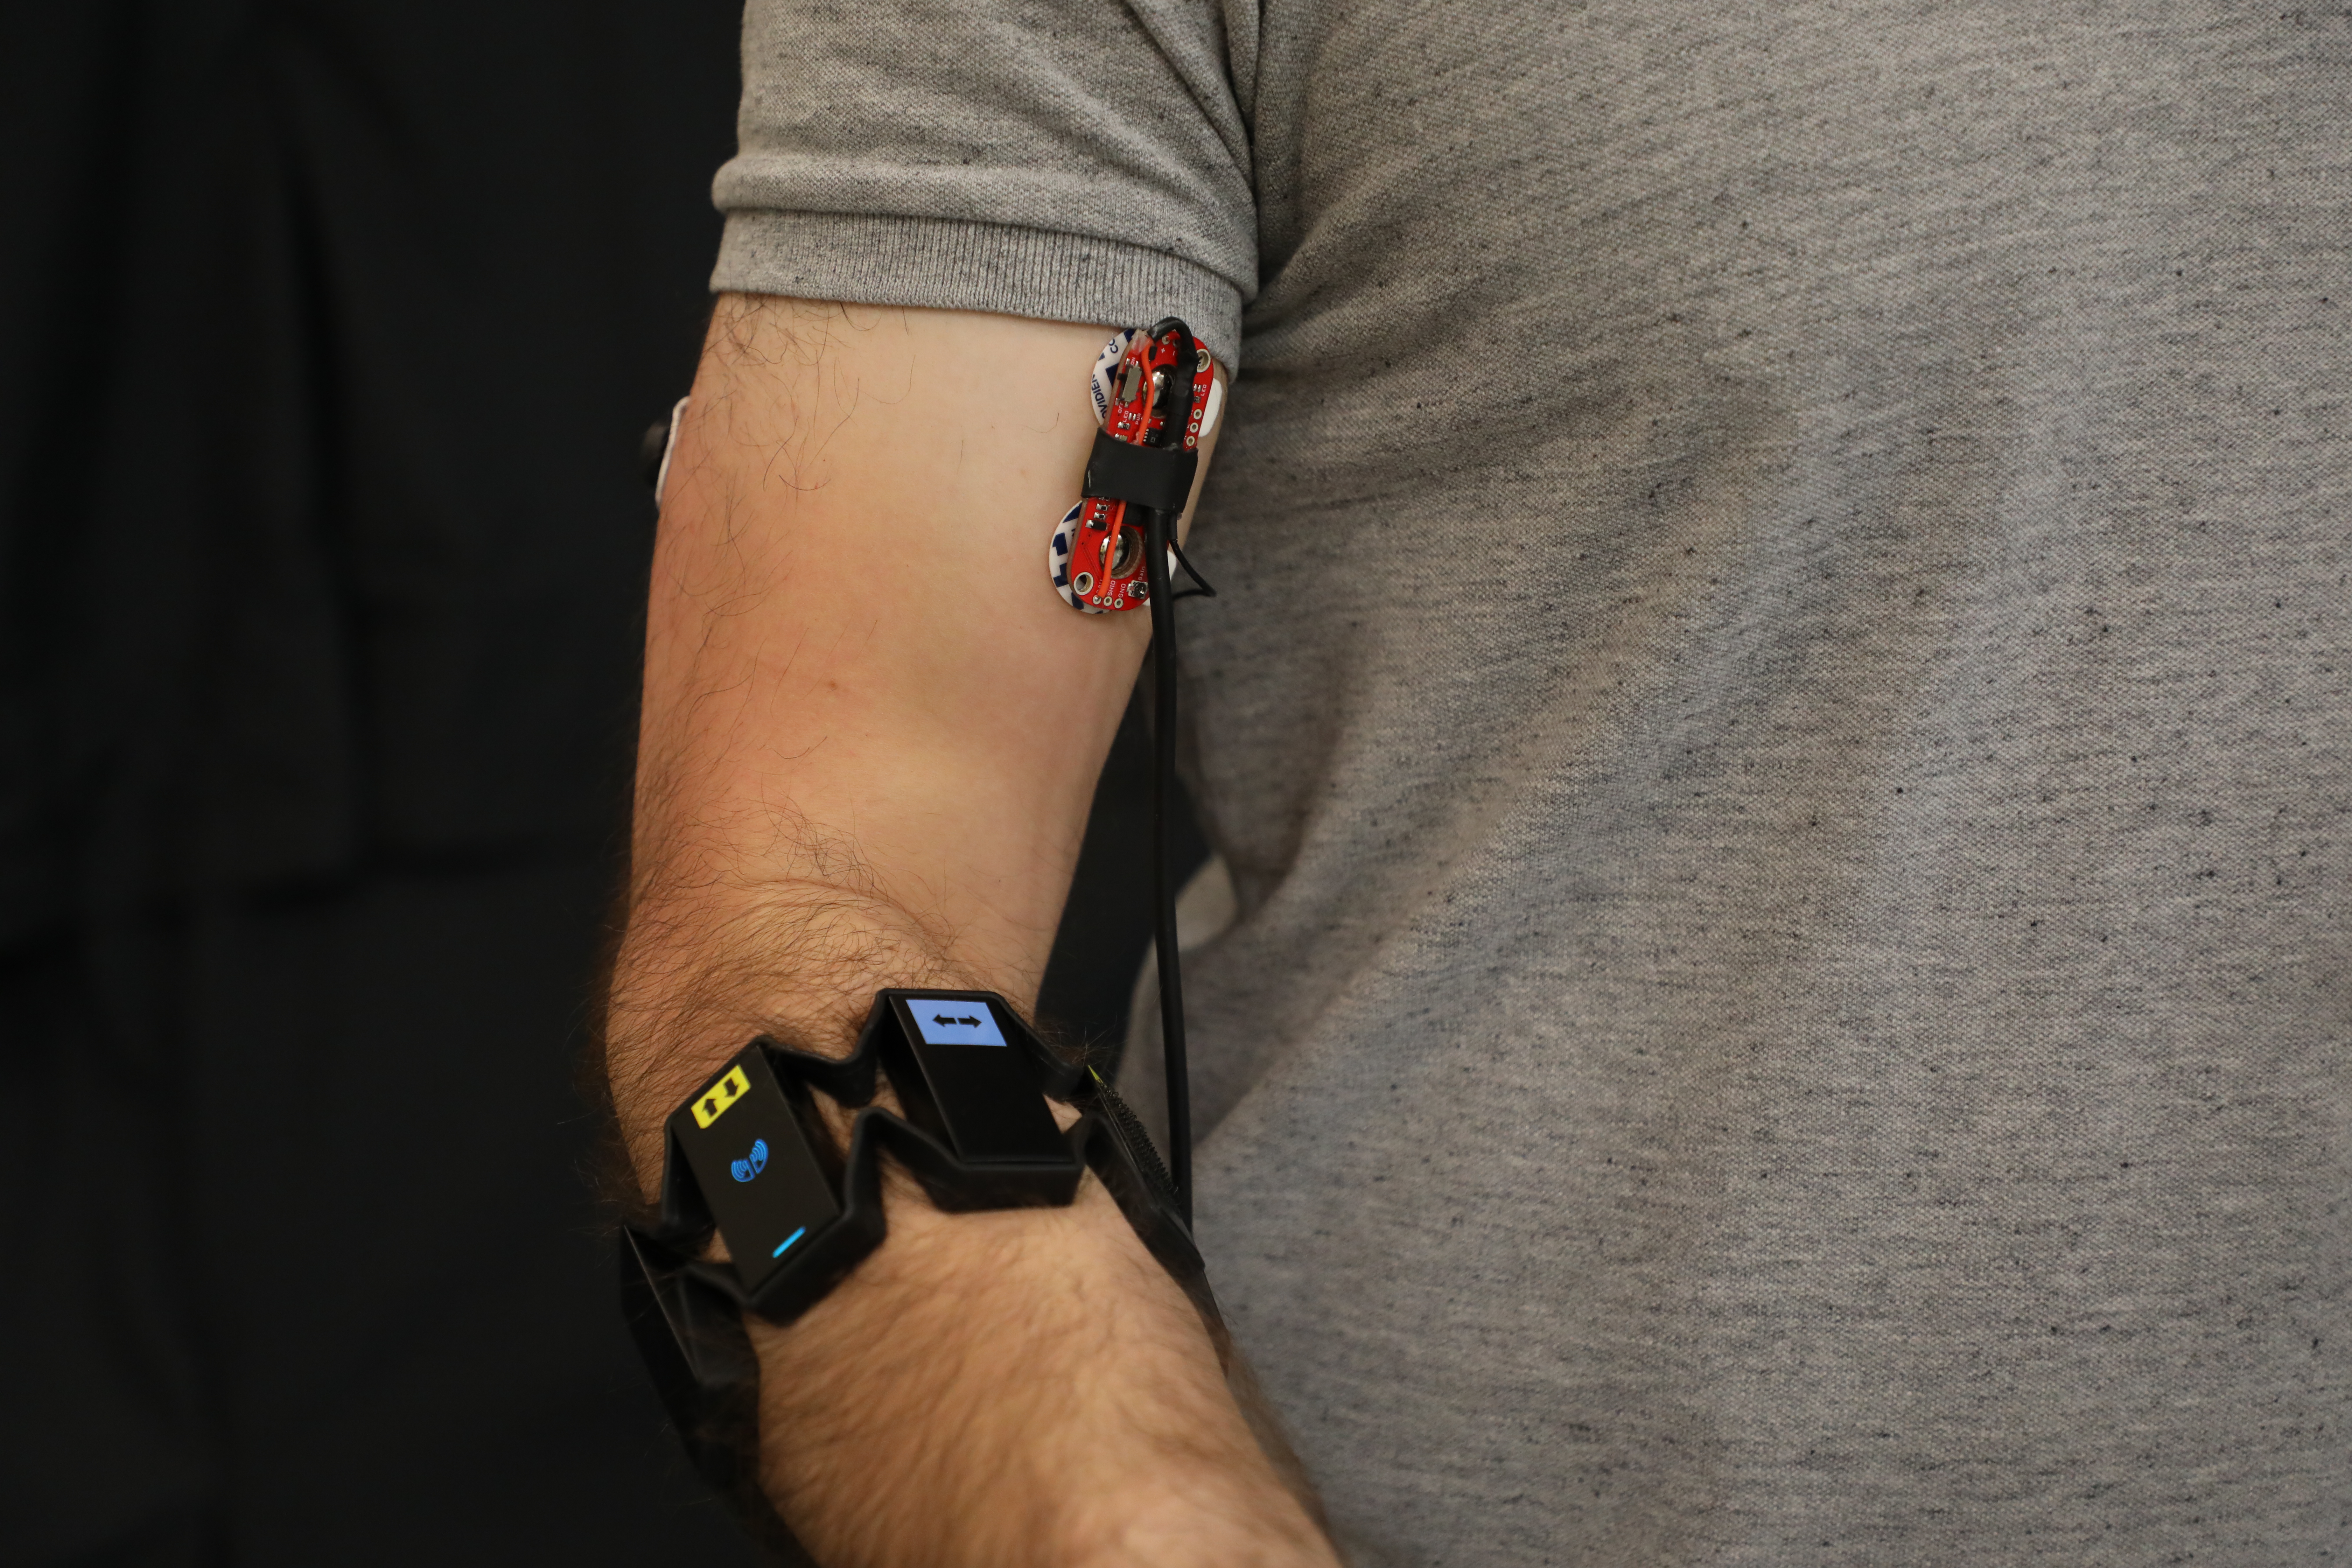 EMG sensors monitor biceps, triceps, and forearm muscles. The forearm device also includes an IMU.